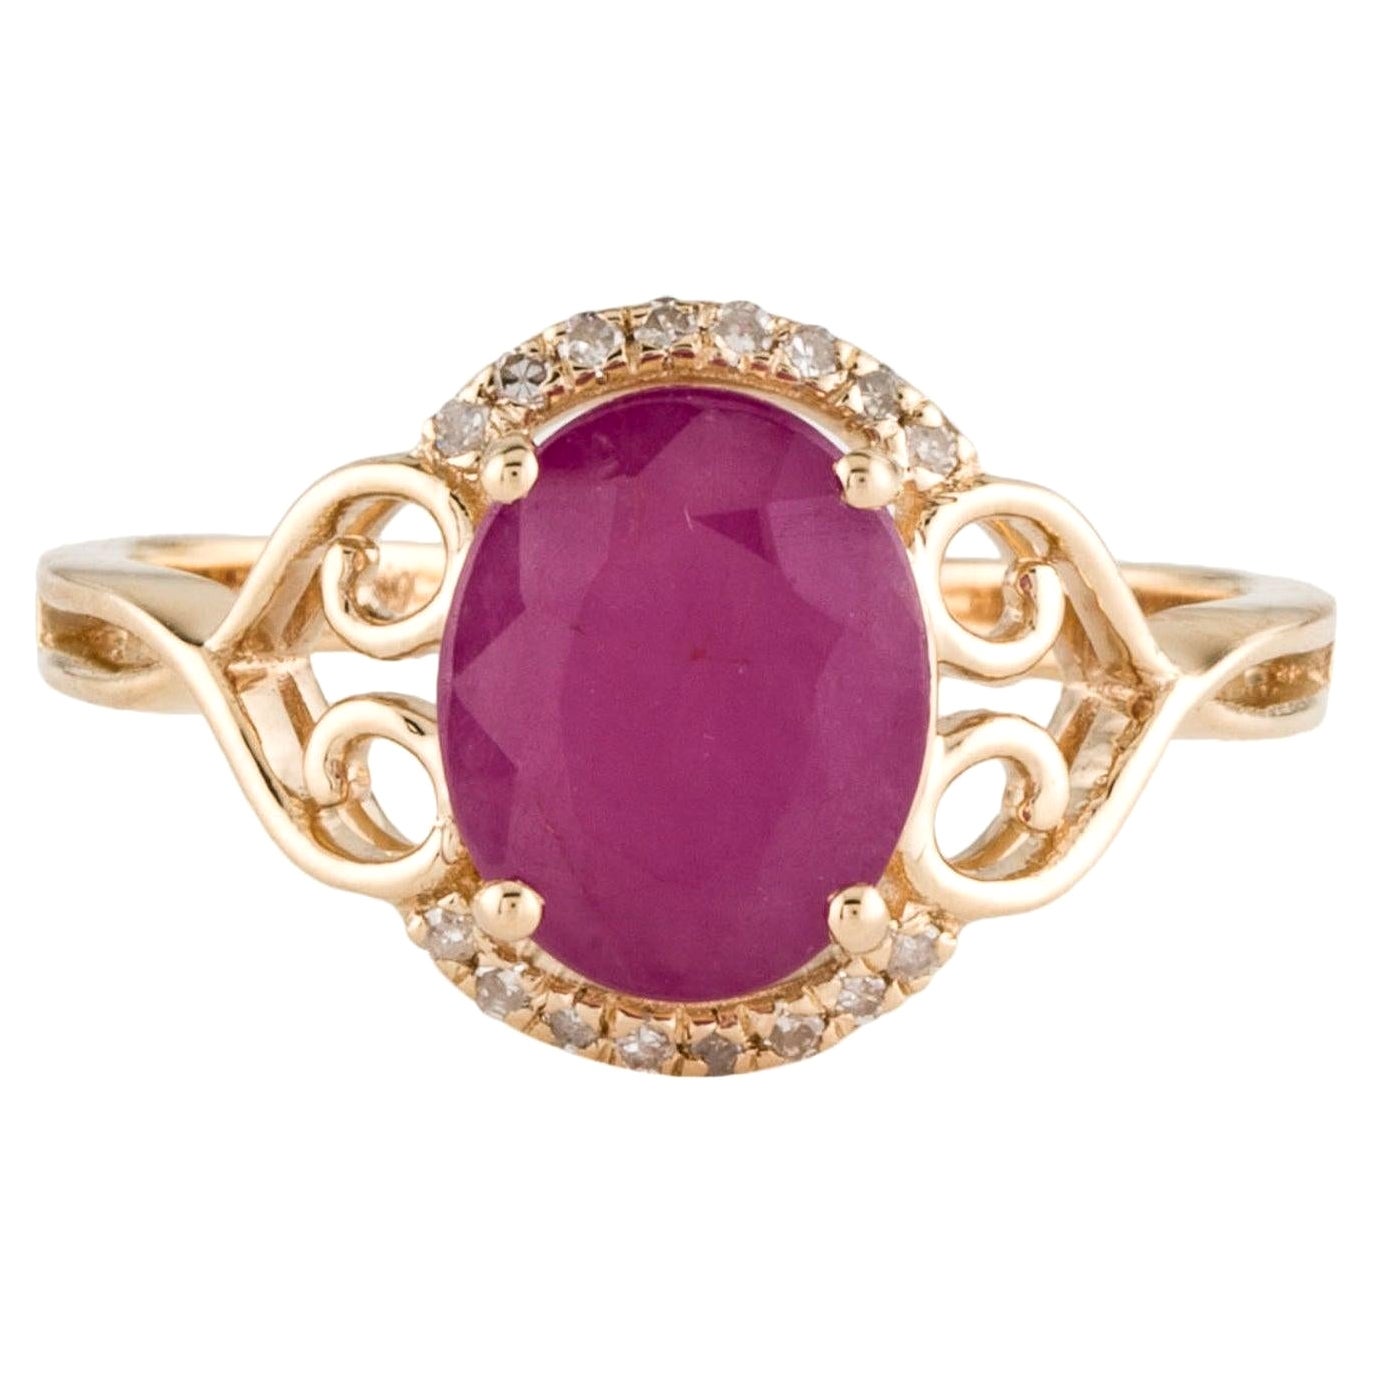 Gorgeous 14K Ruby & Diamond Cluster Cocktail Ring - 2.56ct Gemstones - Size 8 For Sale